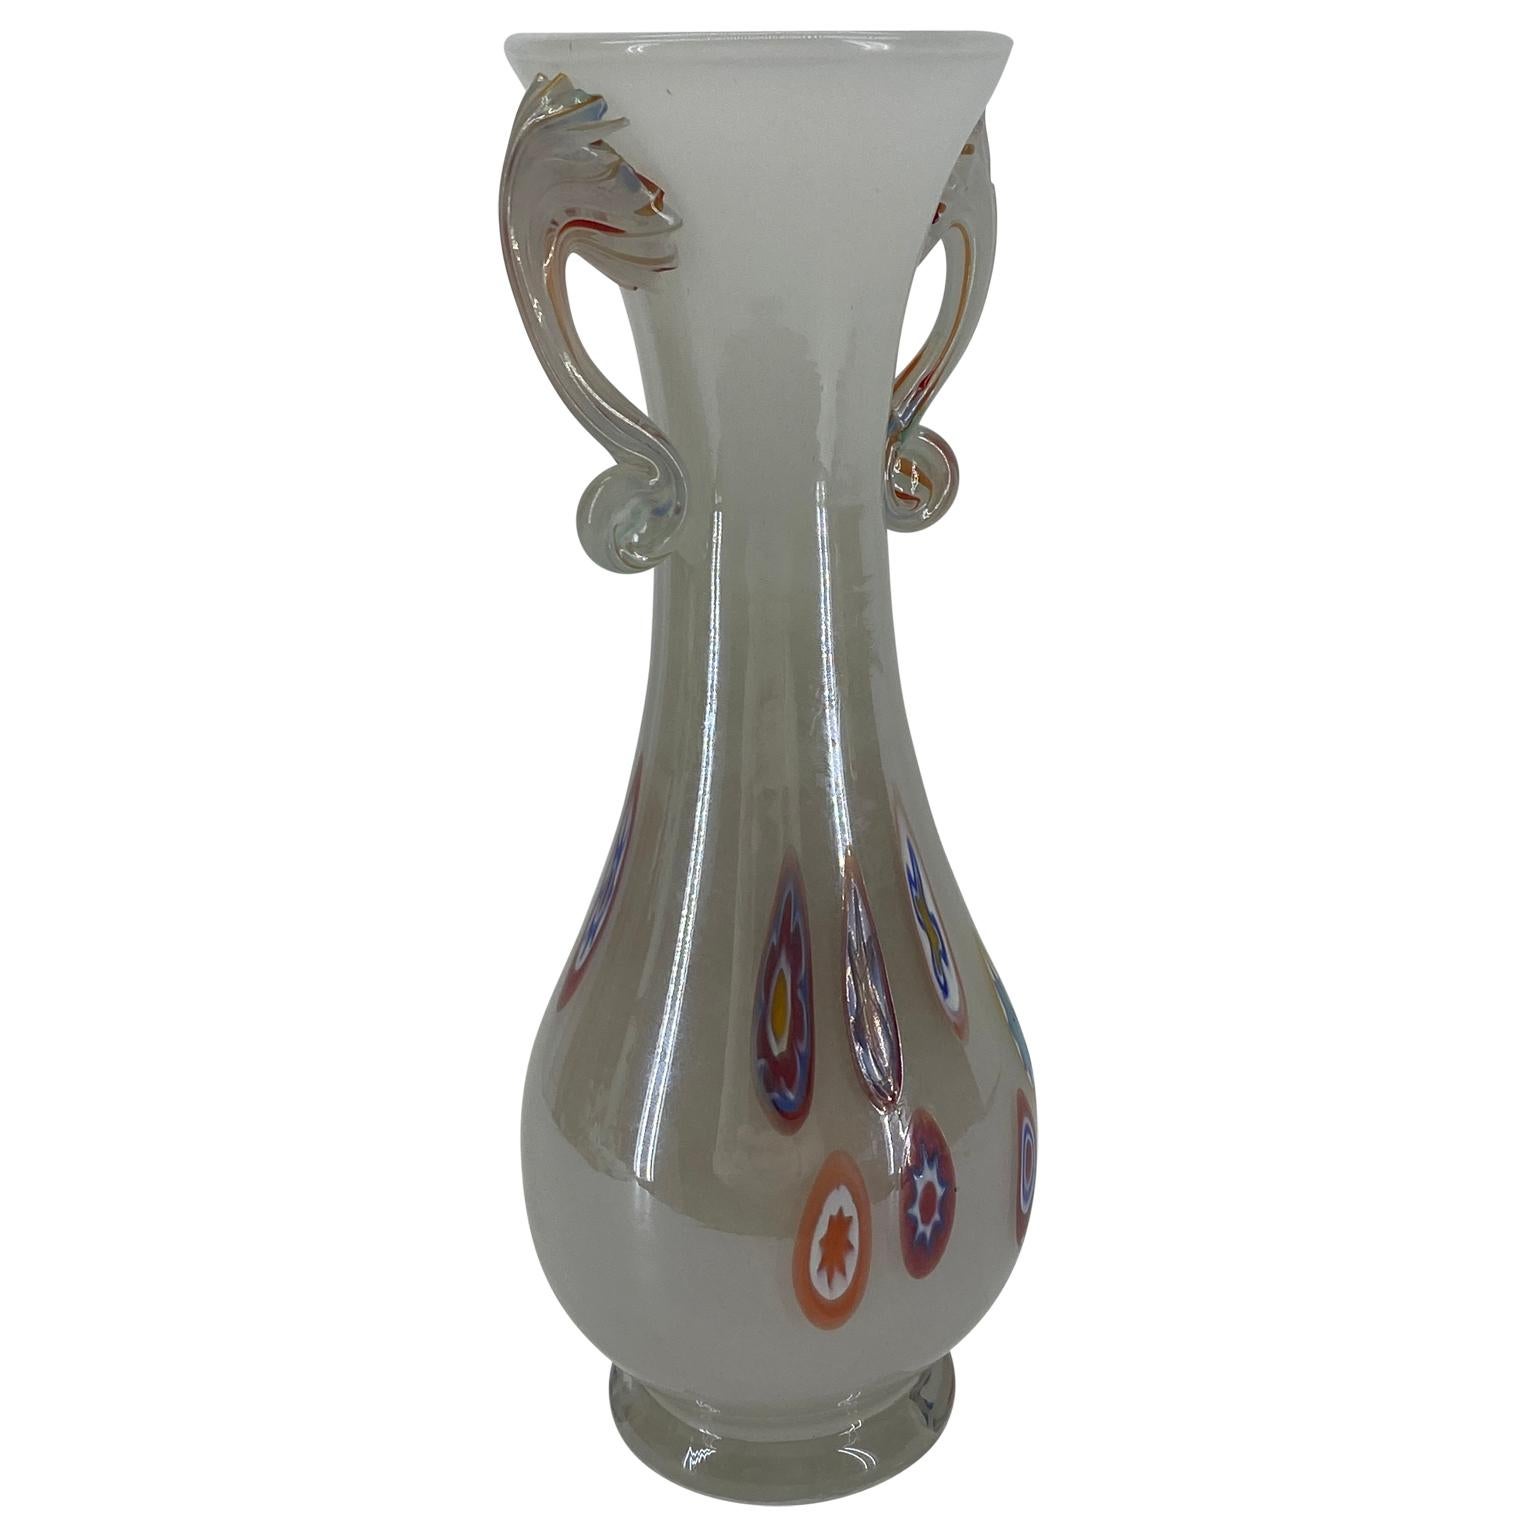 Vintage Murano Italian art glass vase. This lovely vase is hand blown opalescent white with colorful murrines. Documented to the Fratelli Toso Company. The vase has orange, white, blue, yellow, green, purple flowers in different combinations and